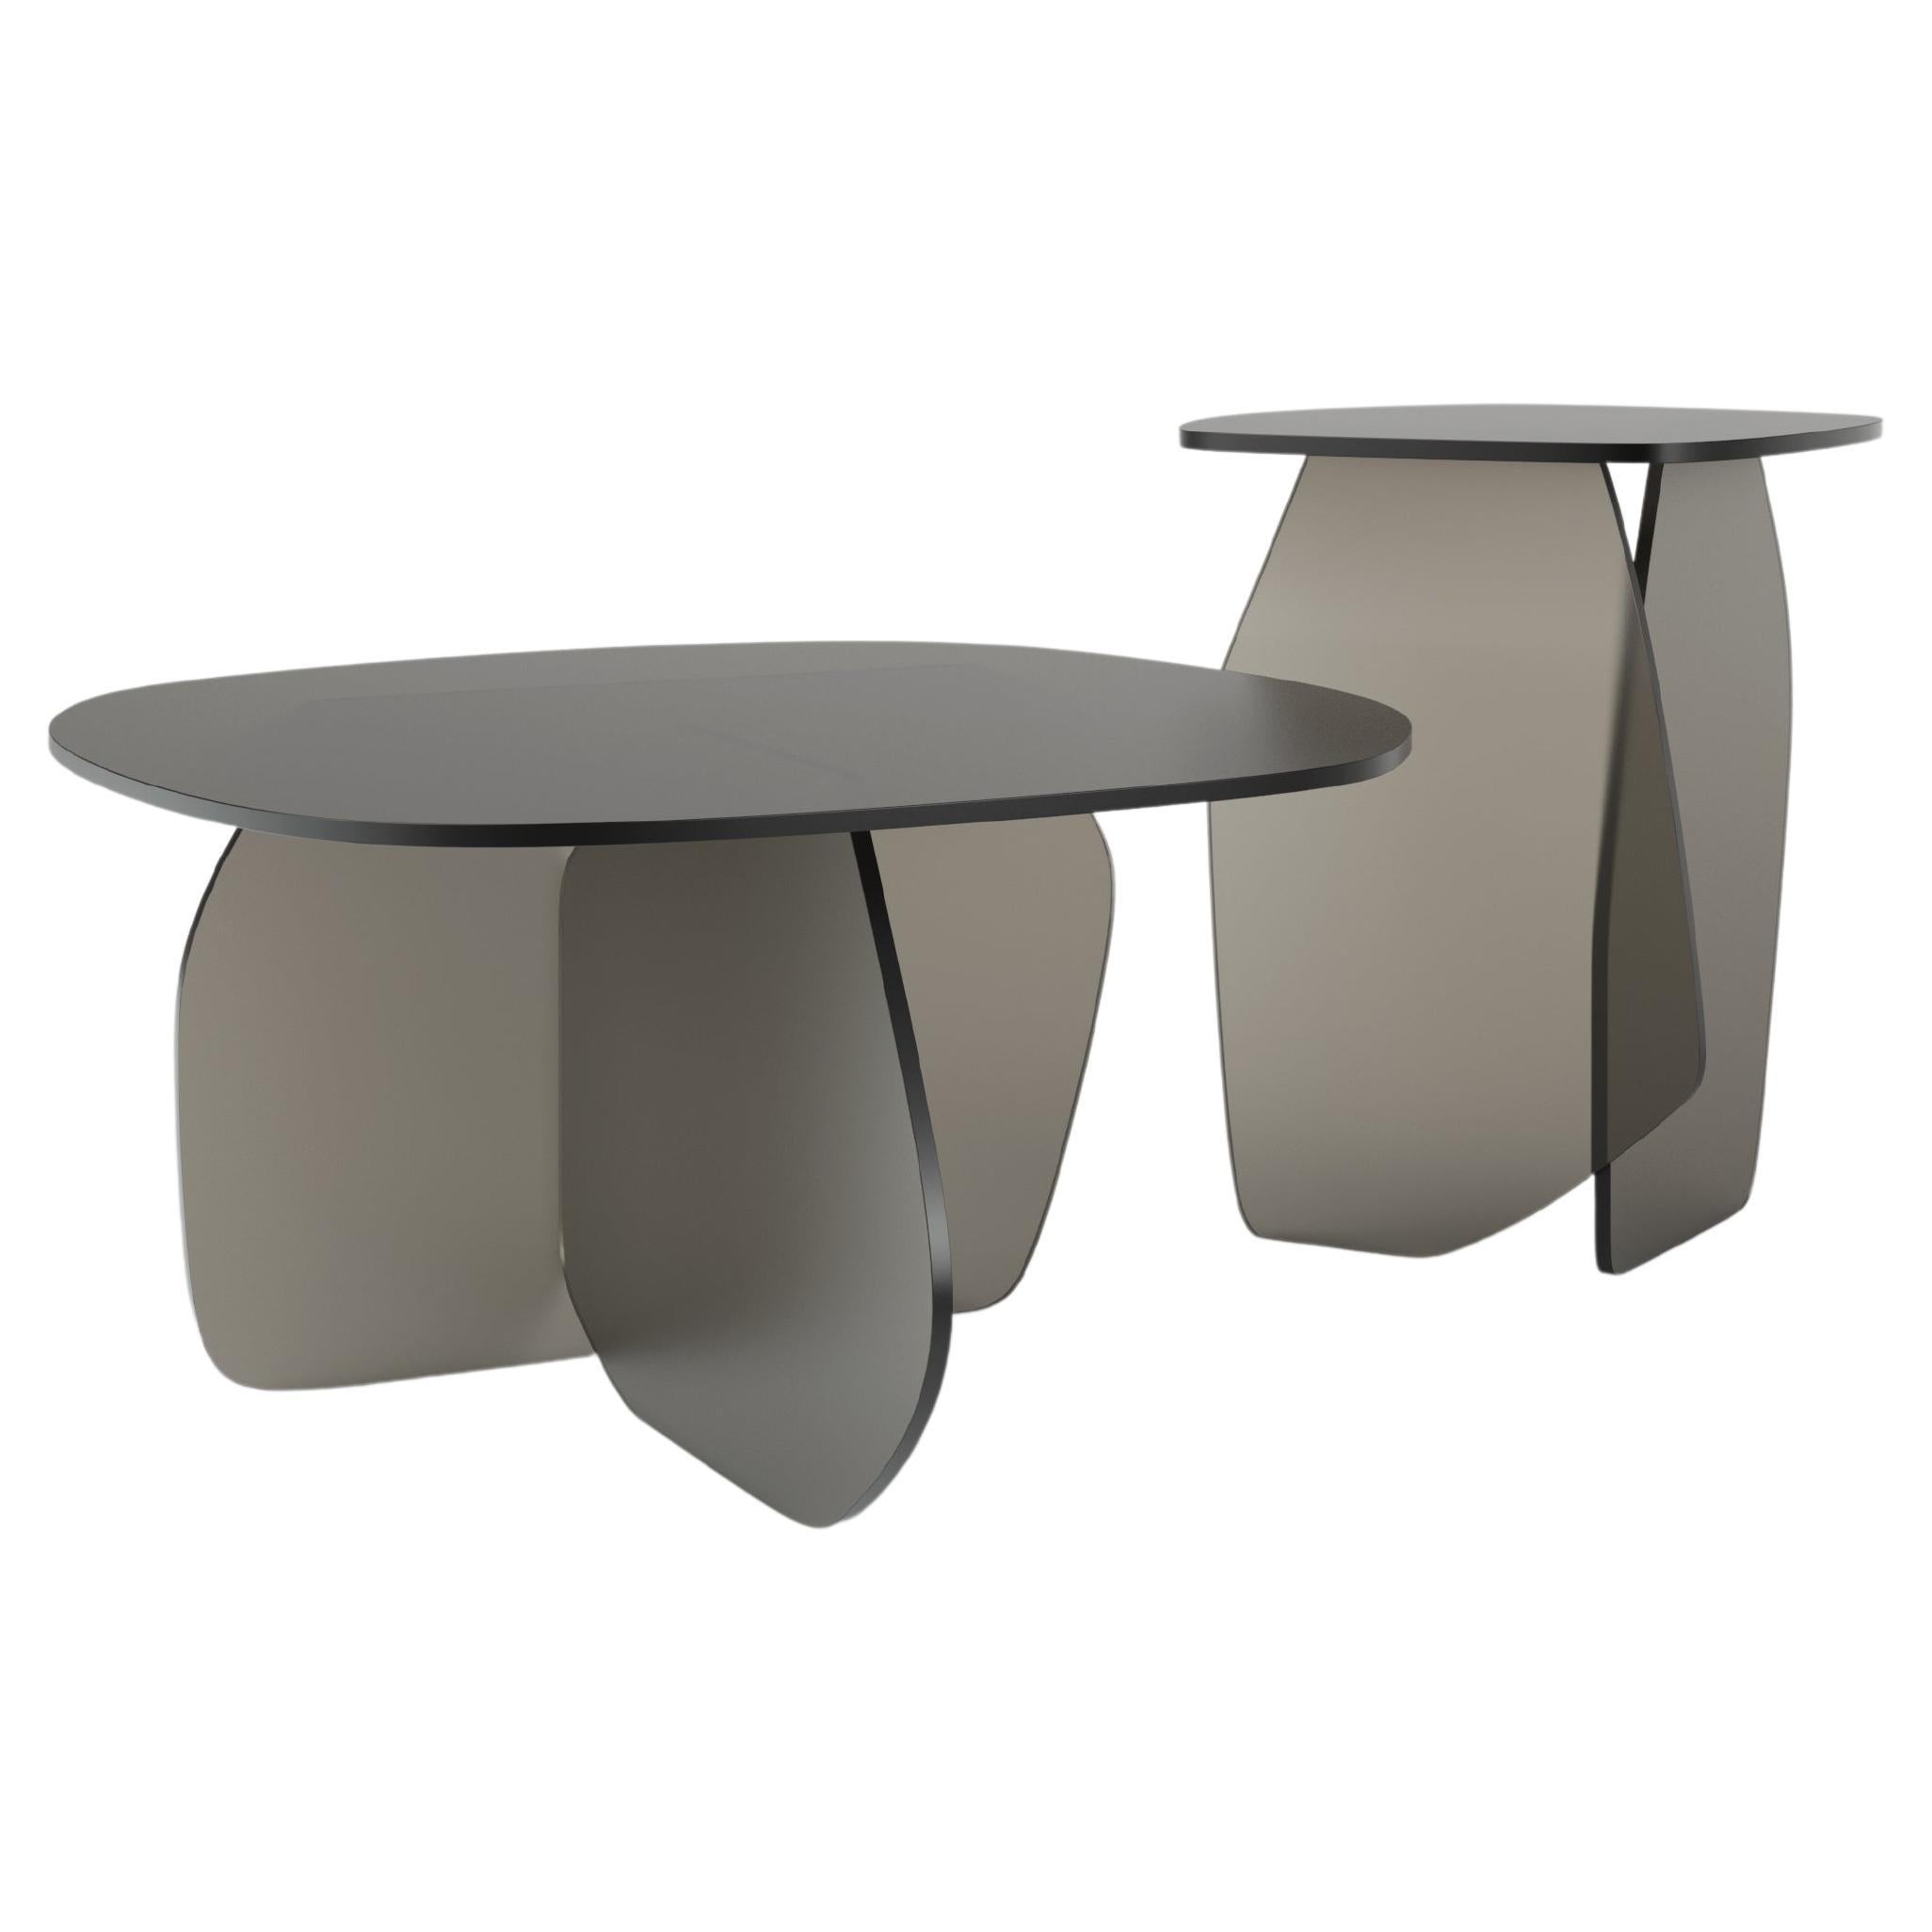 Set of 2 Panorama V1 and V2 Tables by Edizione Limitata For Sale